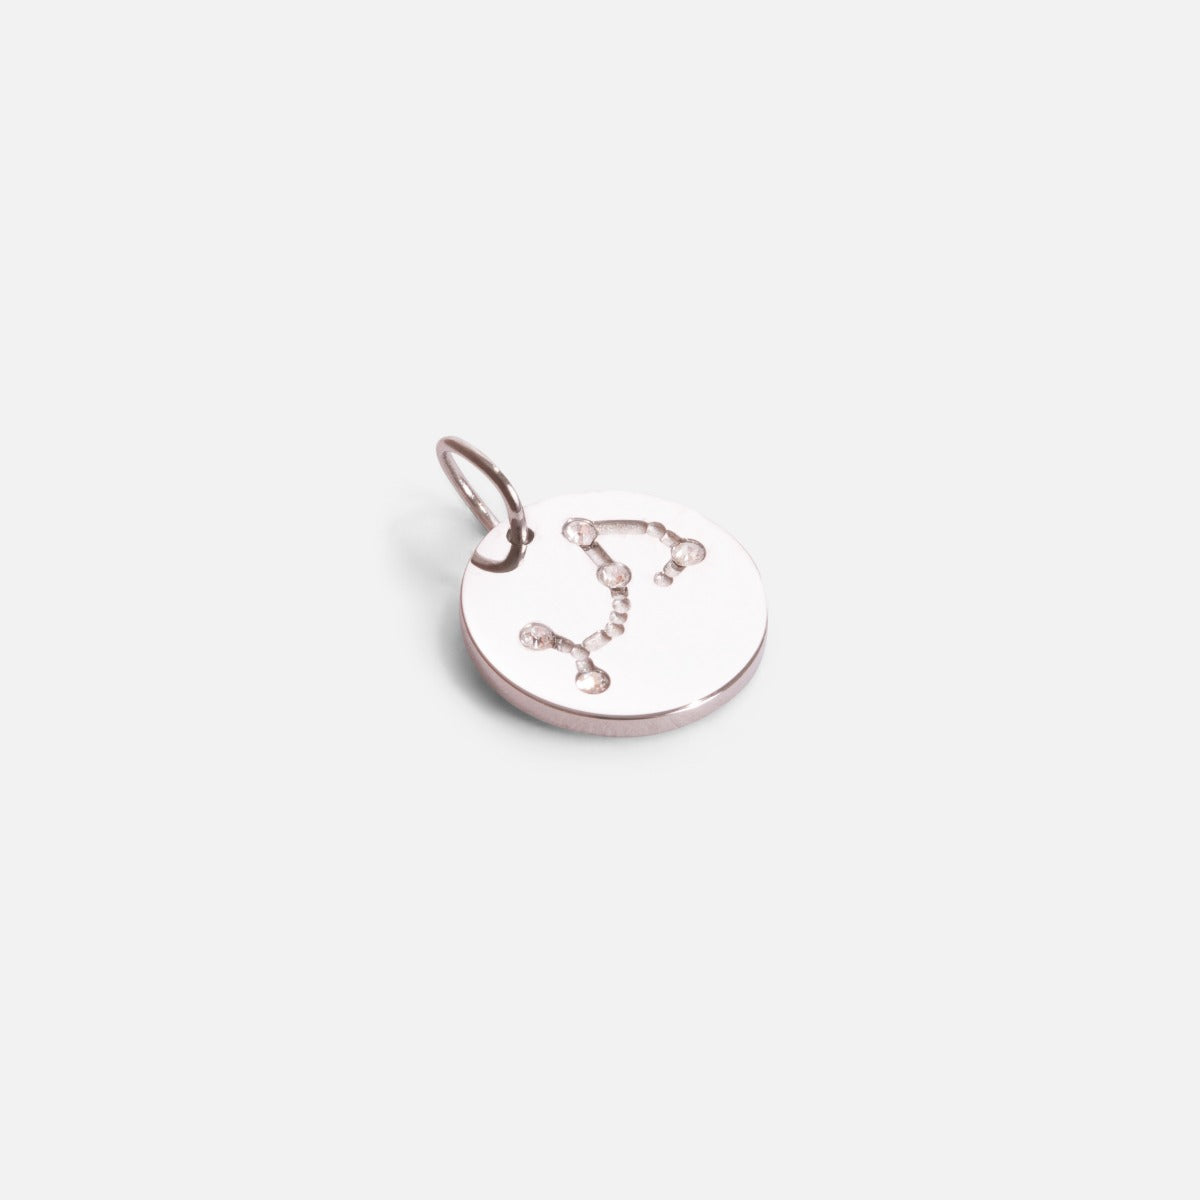 Small silvered charm engraved with the zodiac constellation "scorpio"